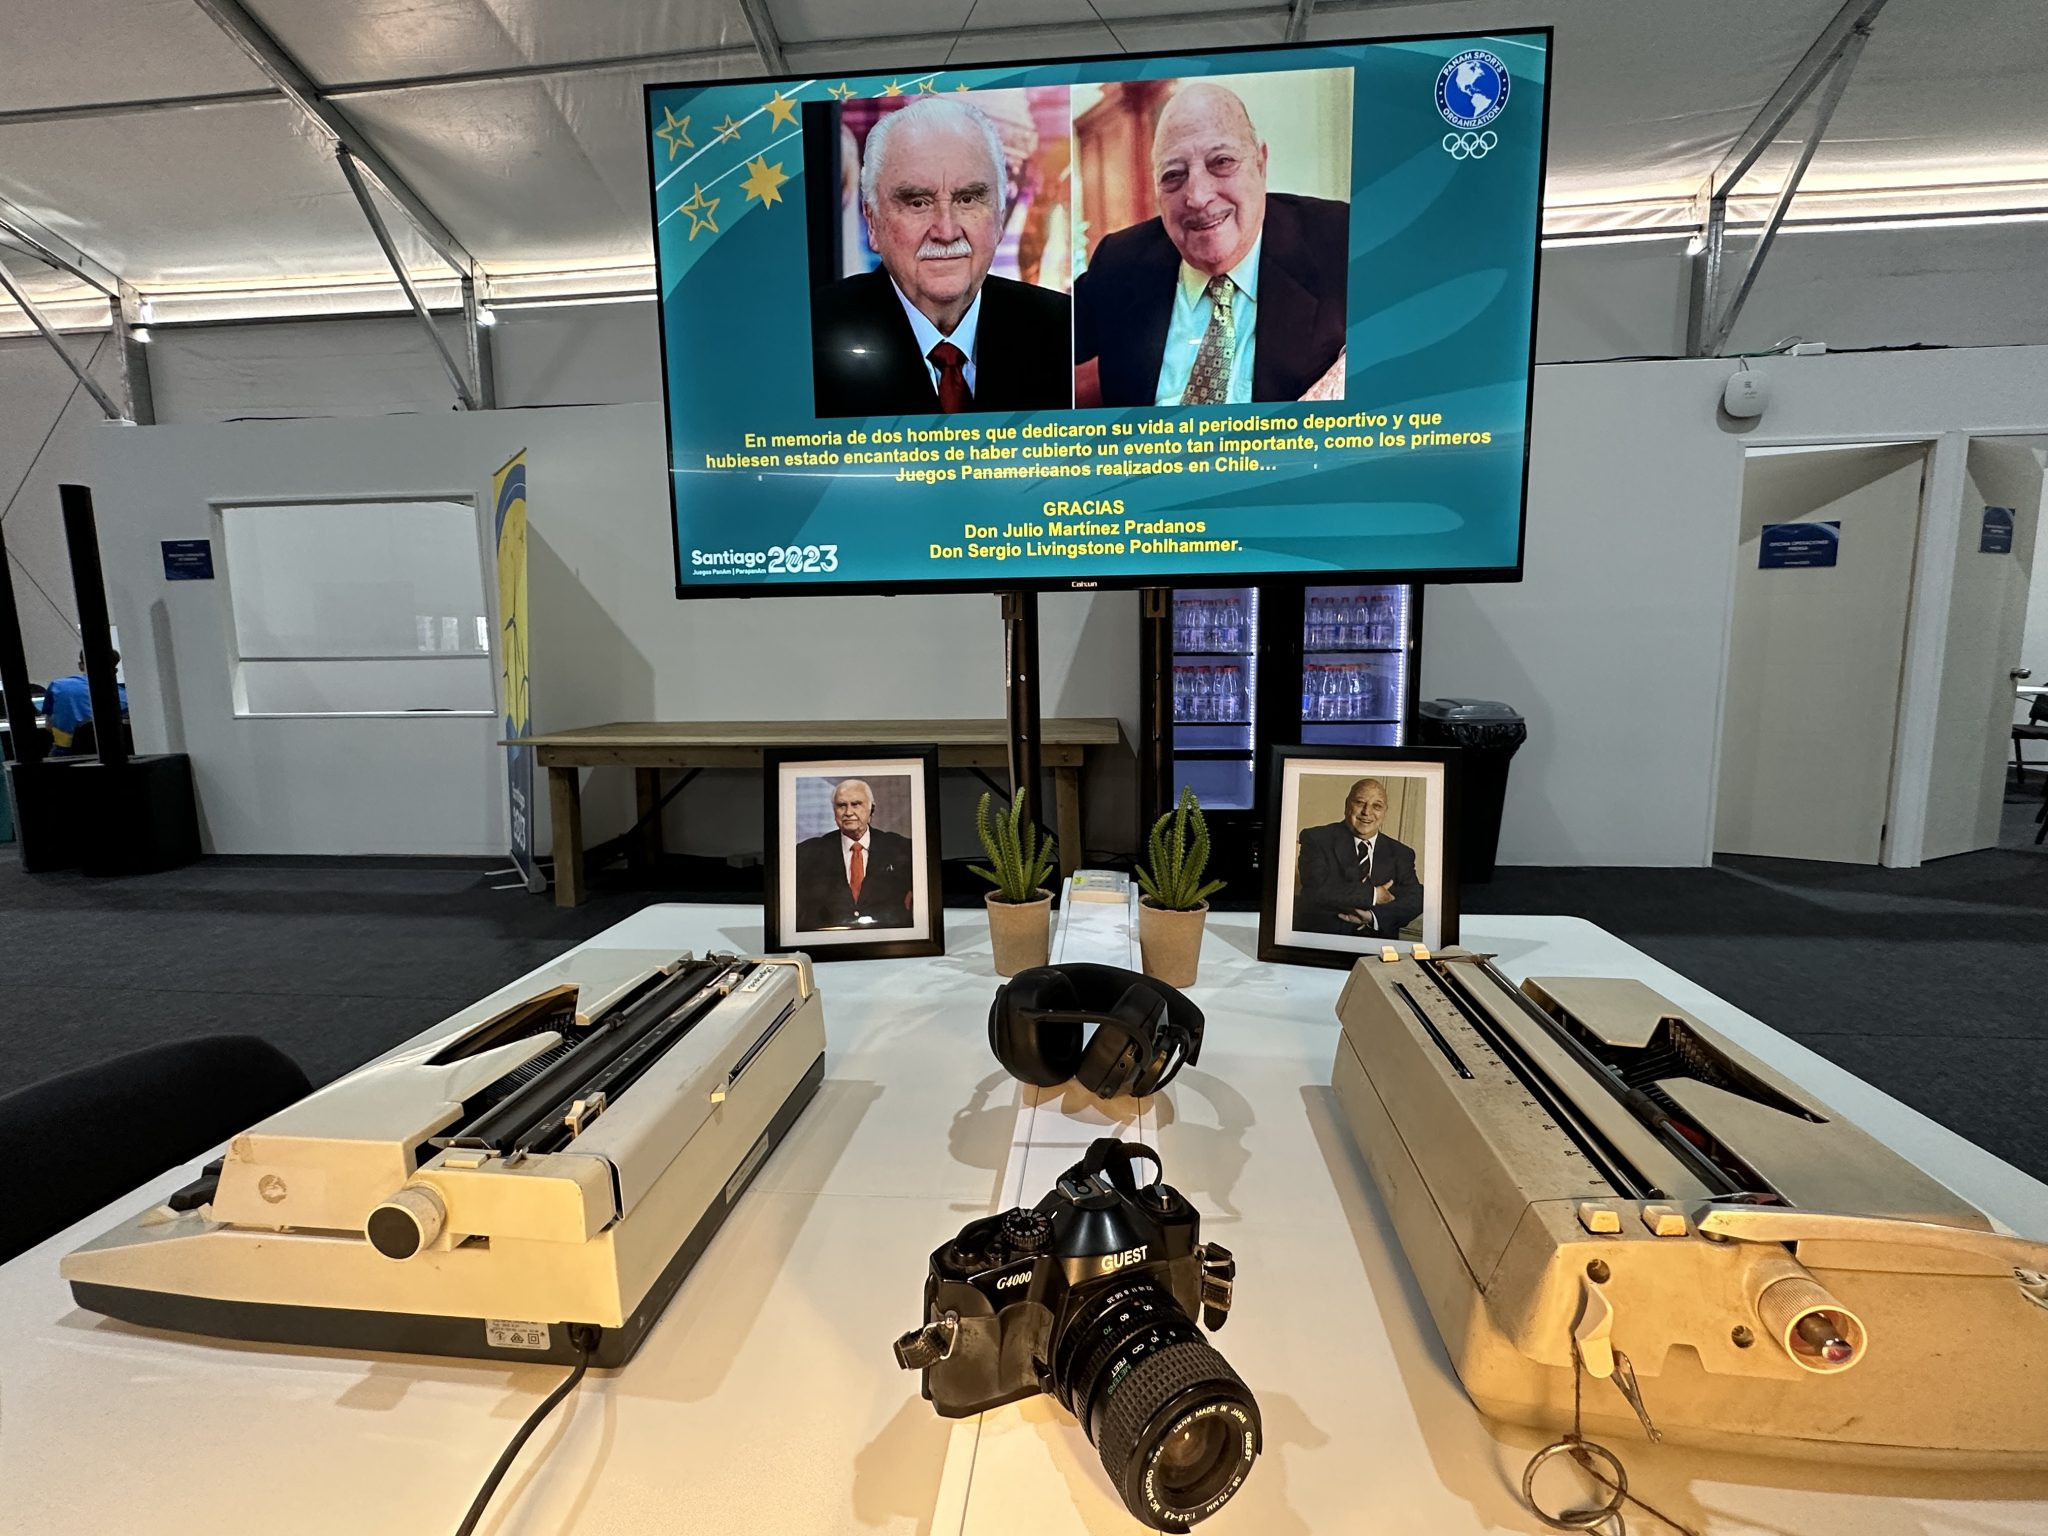 The main press centre for Santiago 2023 has opened with a tribute to a pair of Chilean journalists ©Santiago 2023